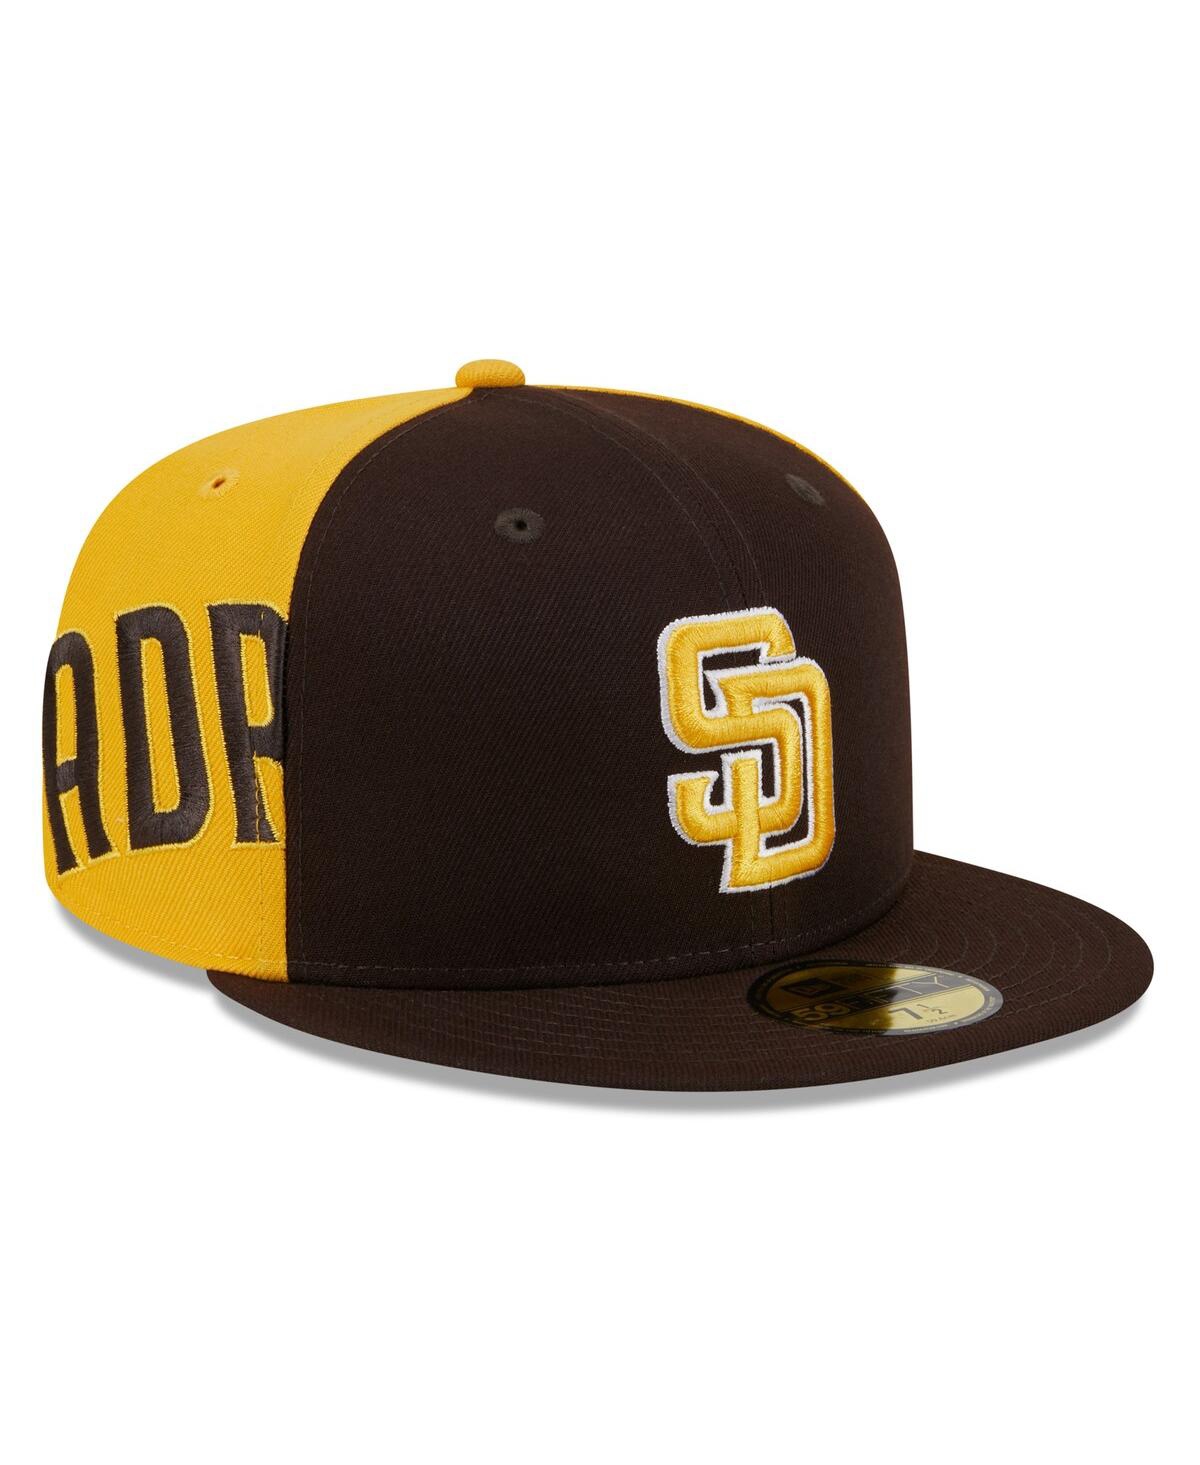 Men's Brown/Gold San Diego Padres Gameday Sideswipe 59fifty Fitted Hat - Brown Gold